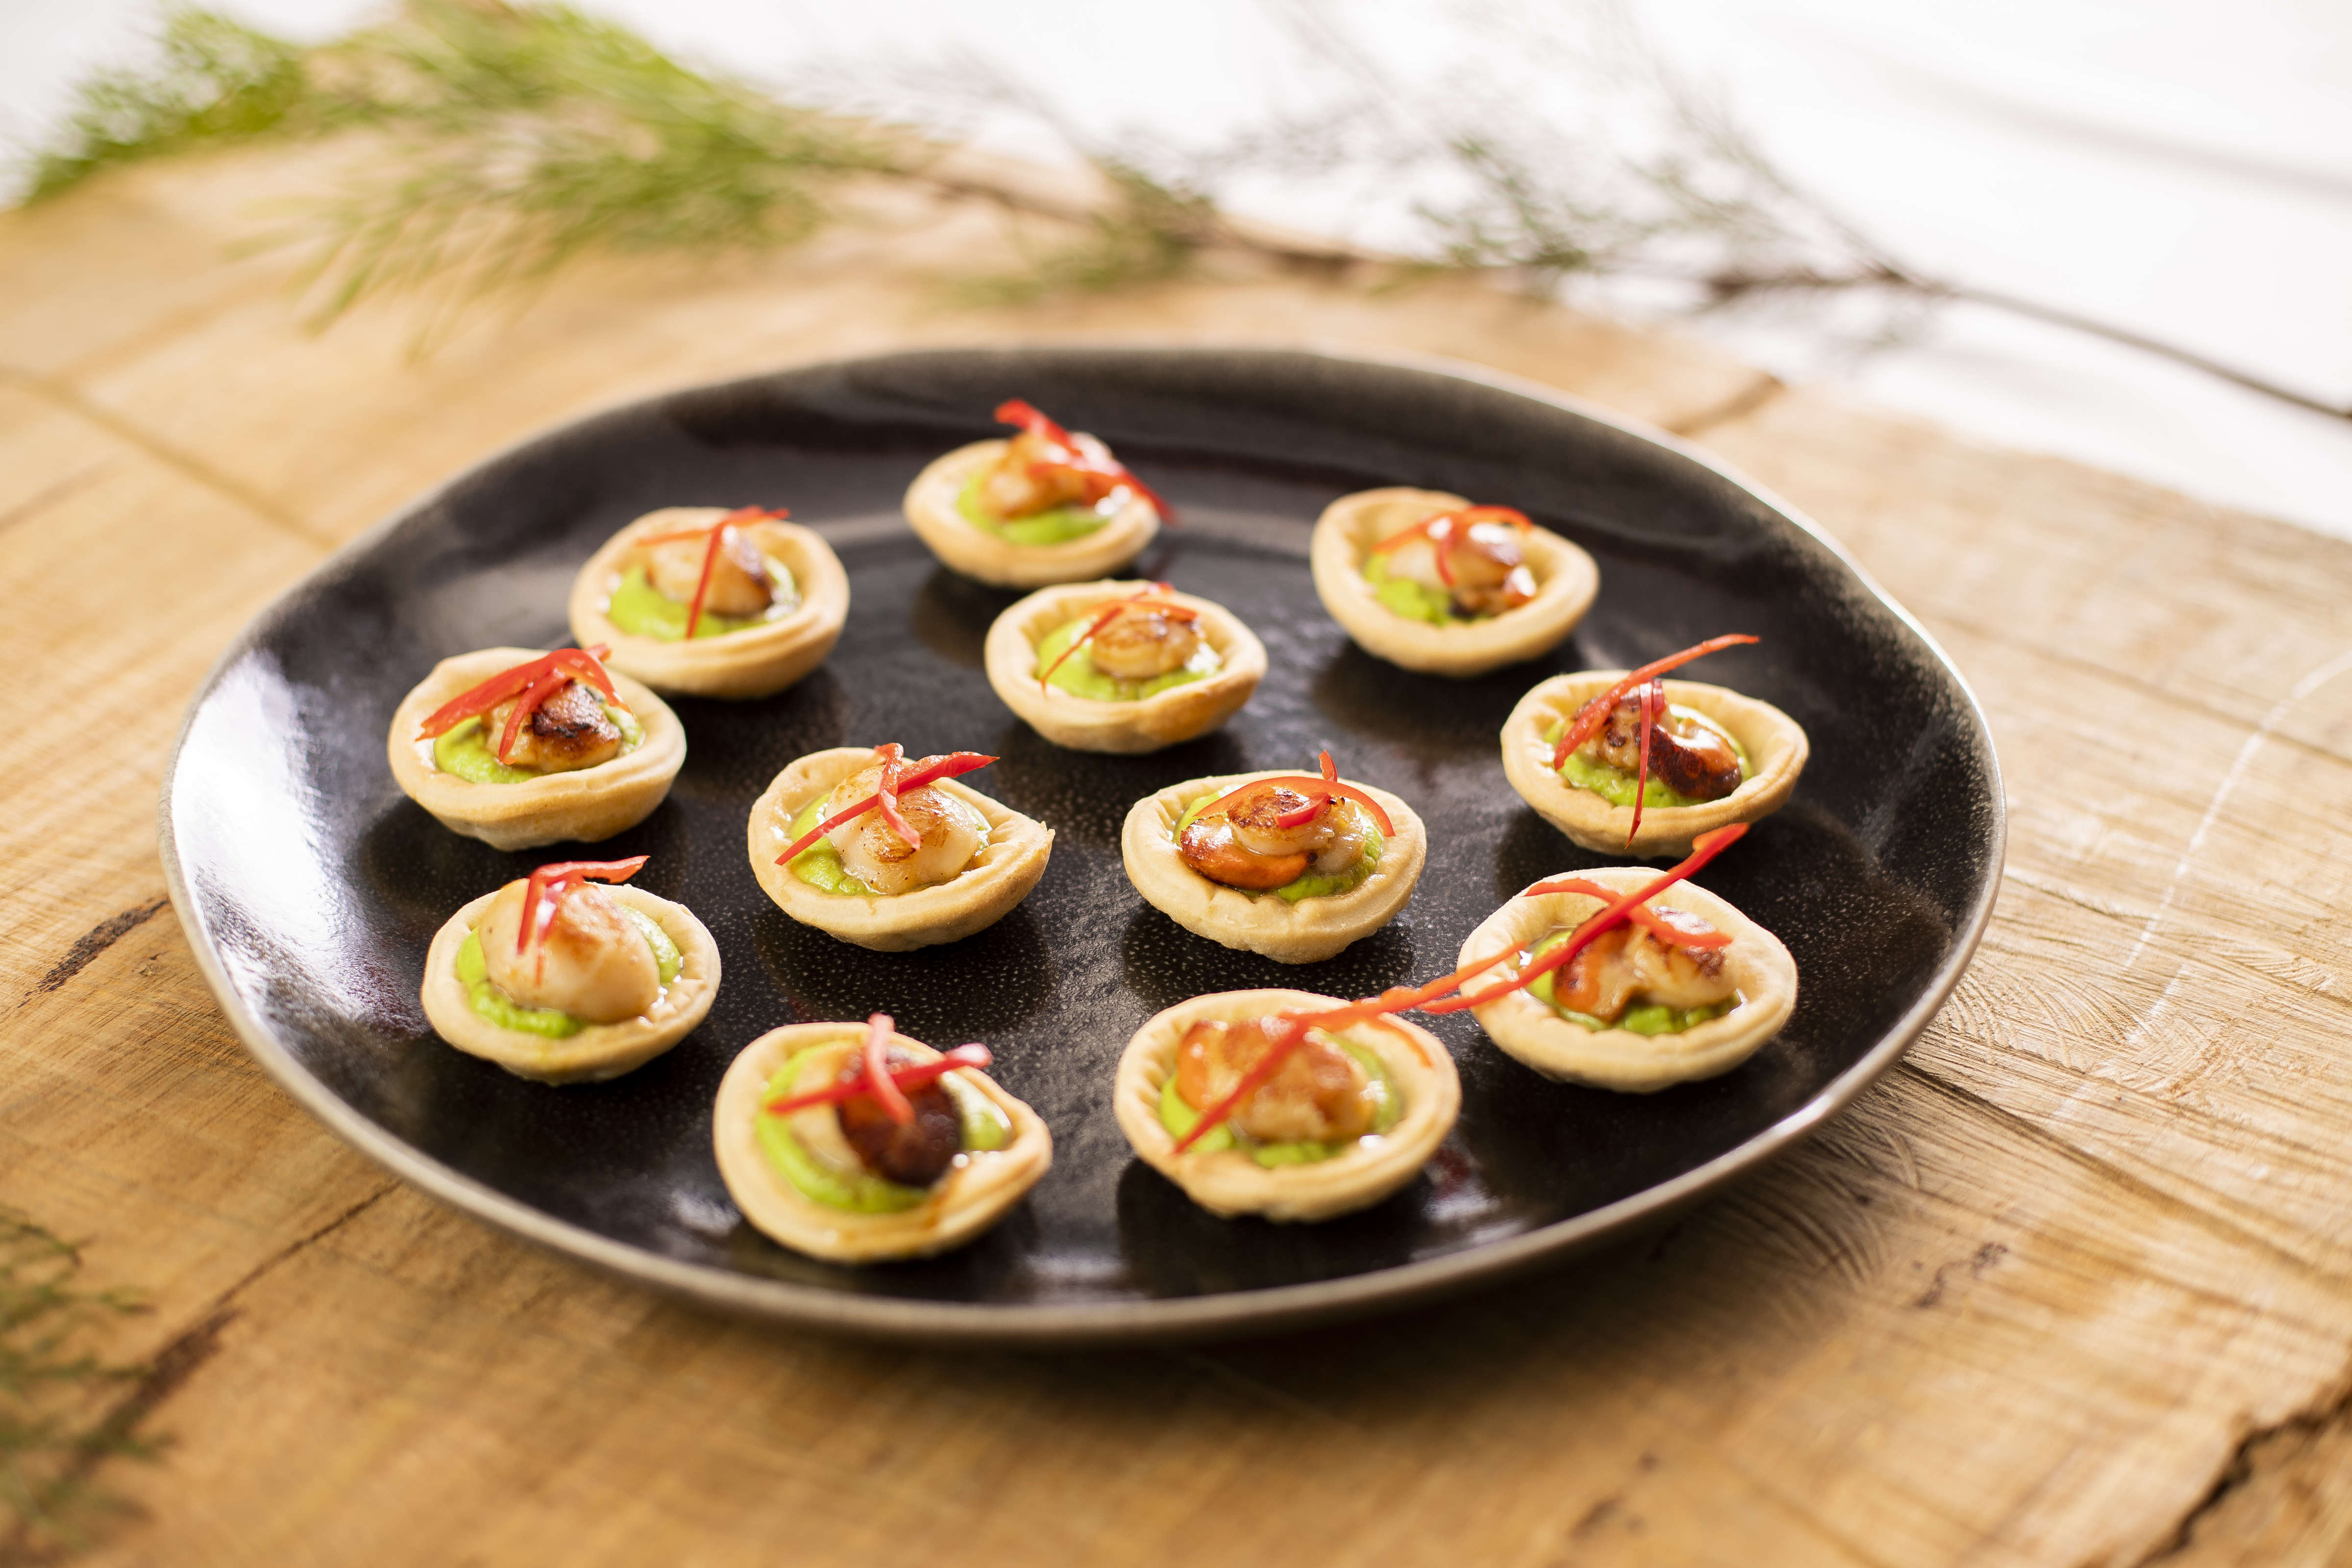 Round platter with tart shells filled with guacamole, panfried scallop, topped with julienne of red capsicum. Photo: Richard Jupe.